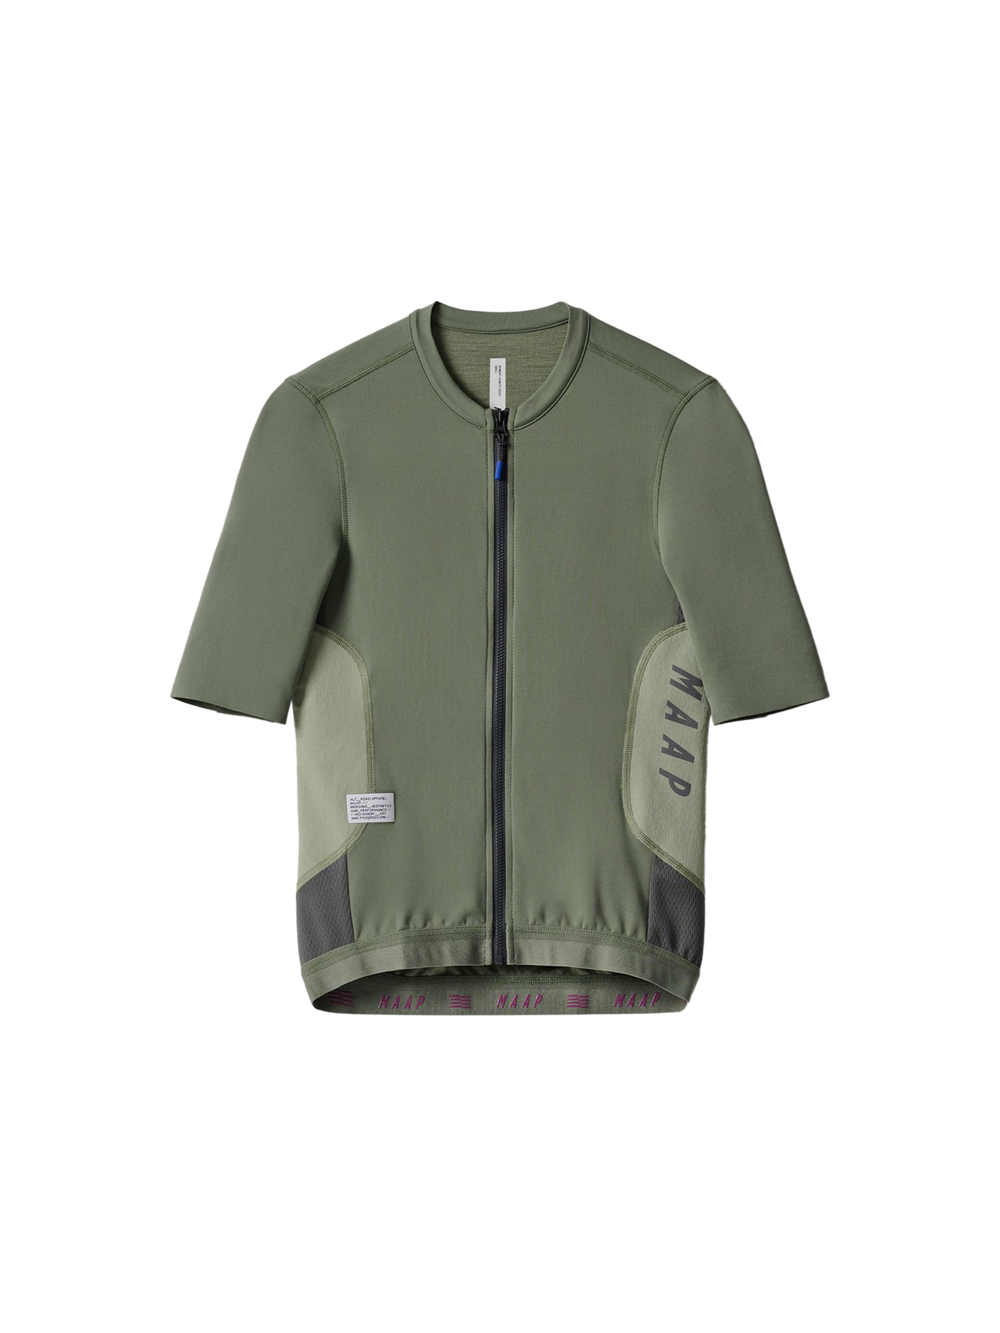 Product Image for Women's Alt_Road Jersey